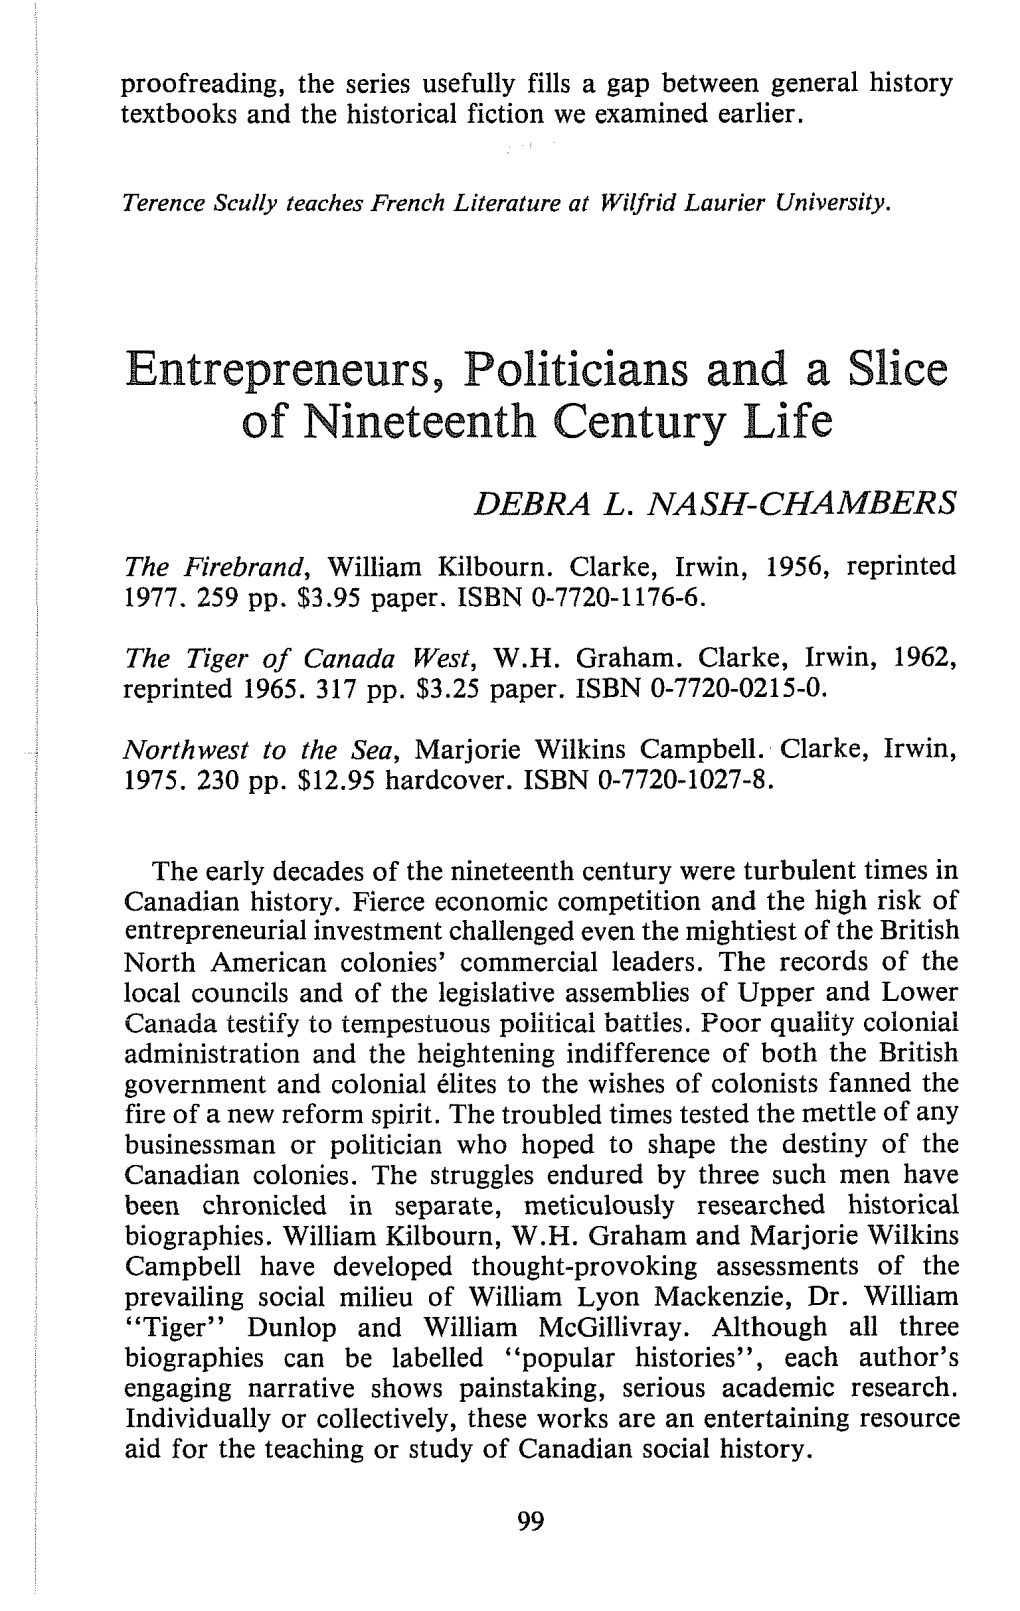 Entrepreneurs, Politicians and a Slice of Nineteenth Century Life